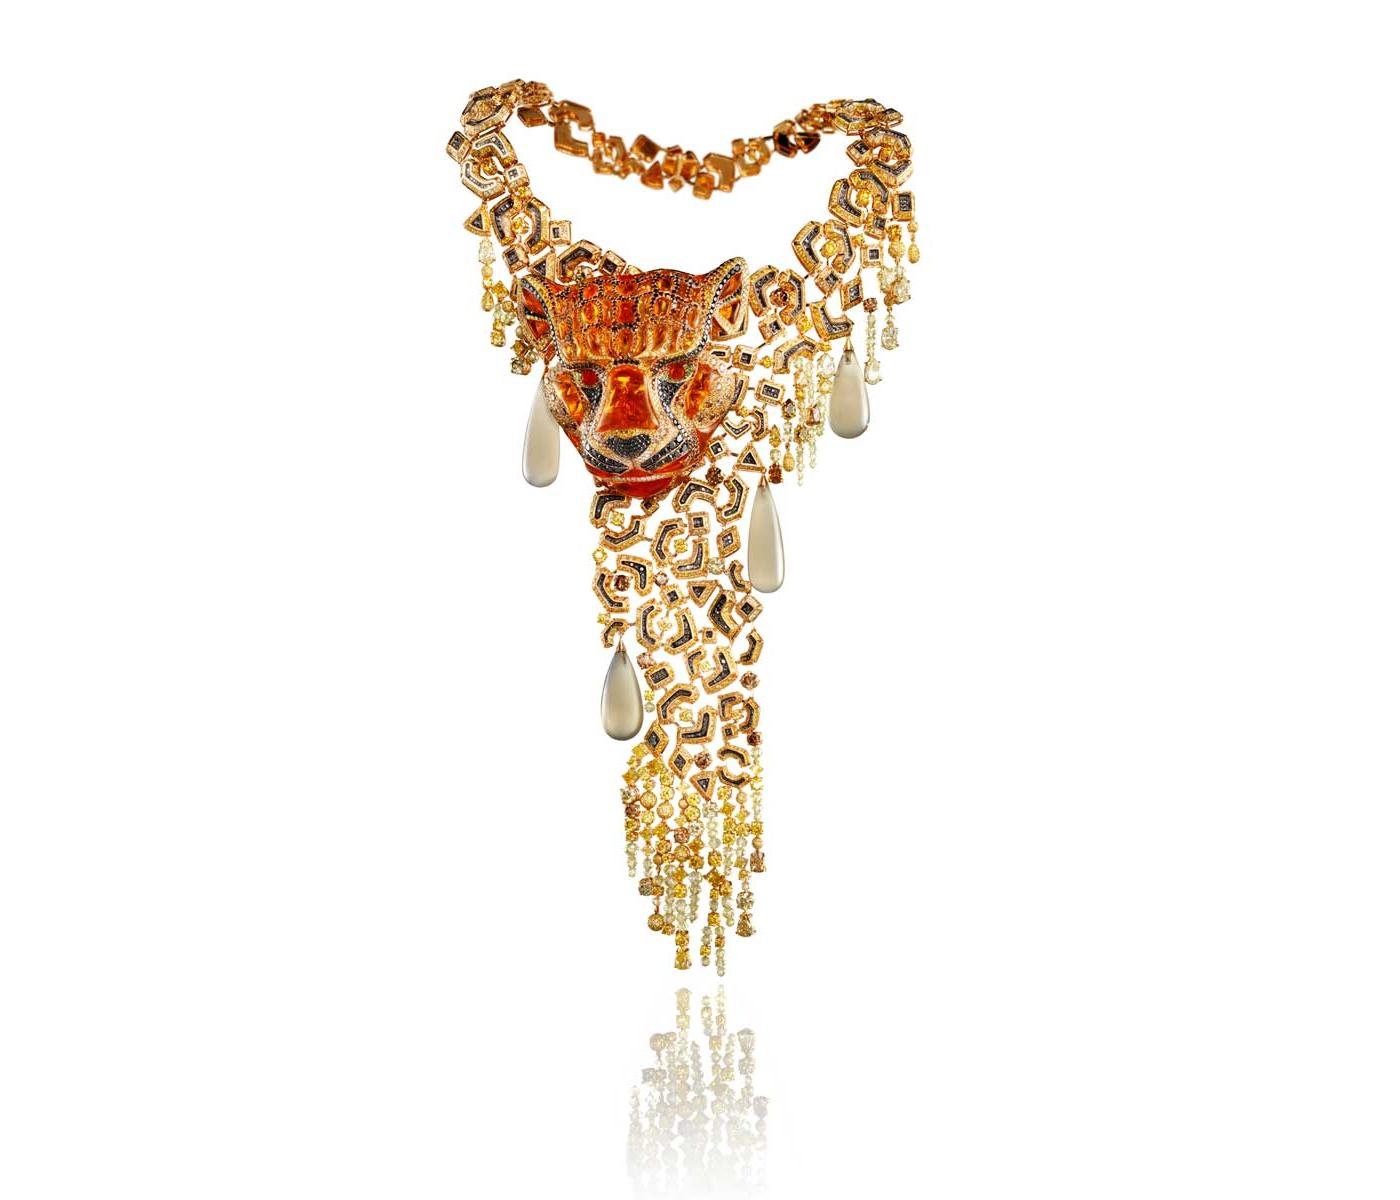 Necklace by Chopard